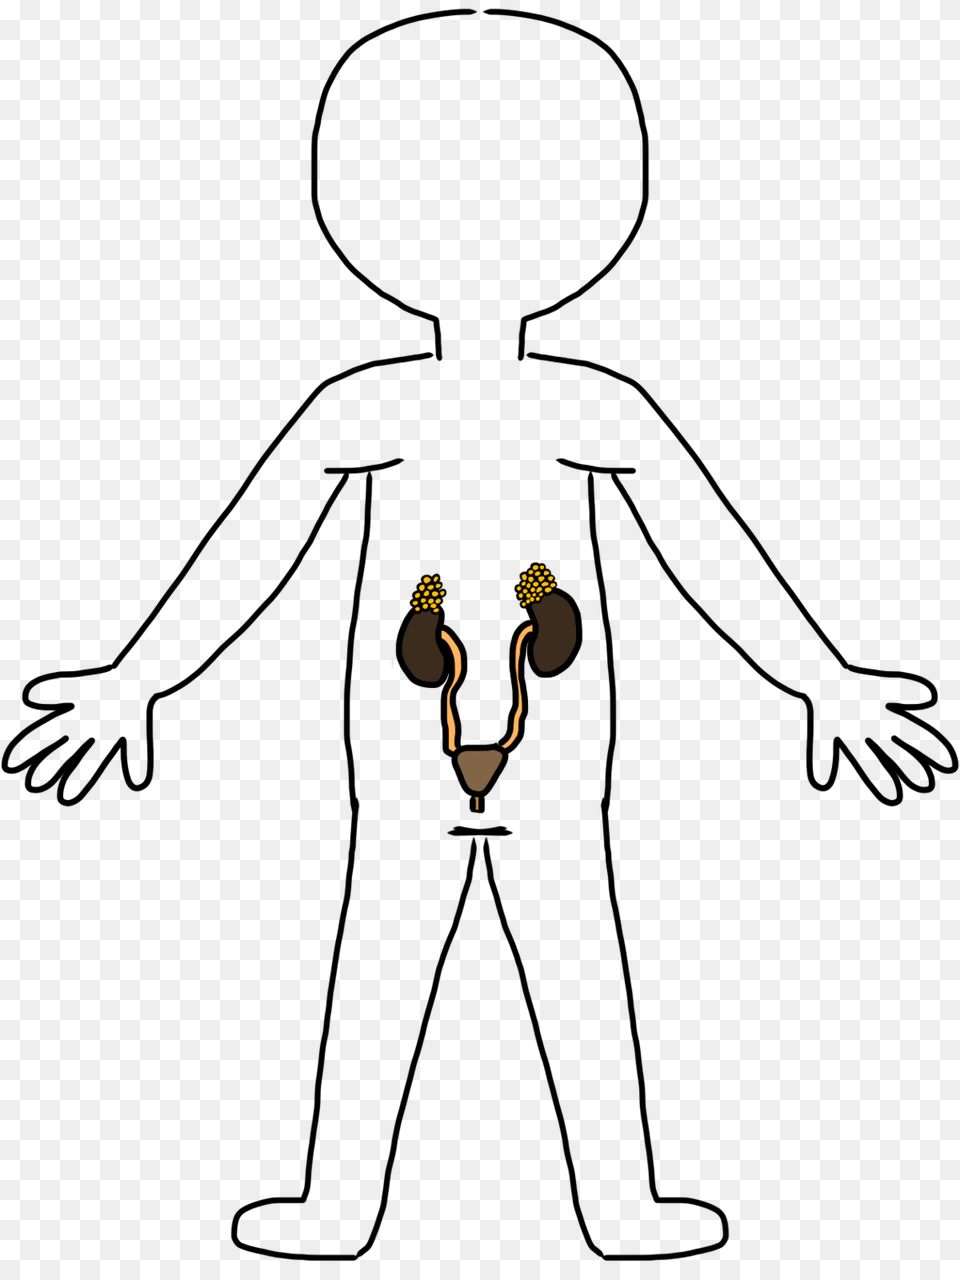 Clip Art Clip Art Of Body, Electrical Device, Microphone, Cutlery, Person Free Png Download